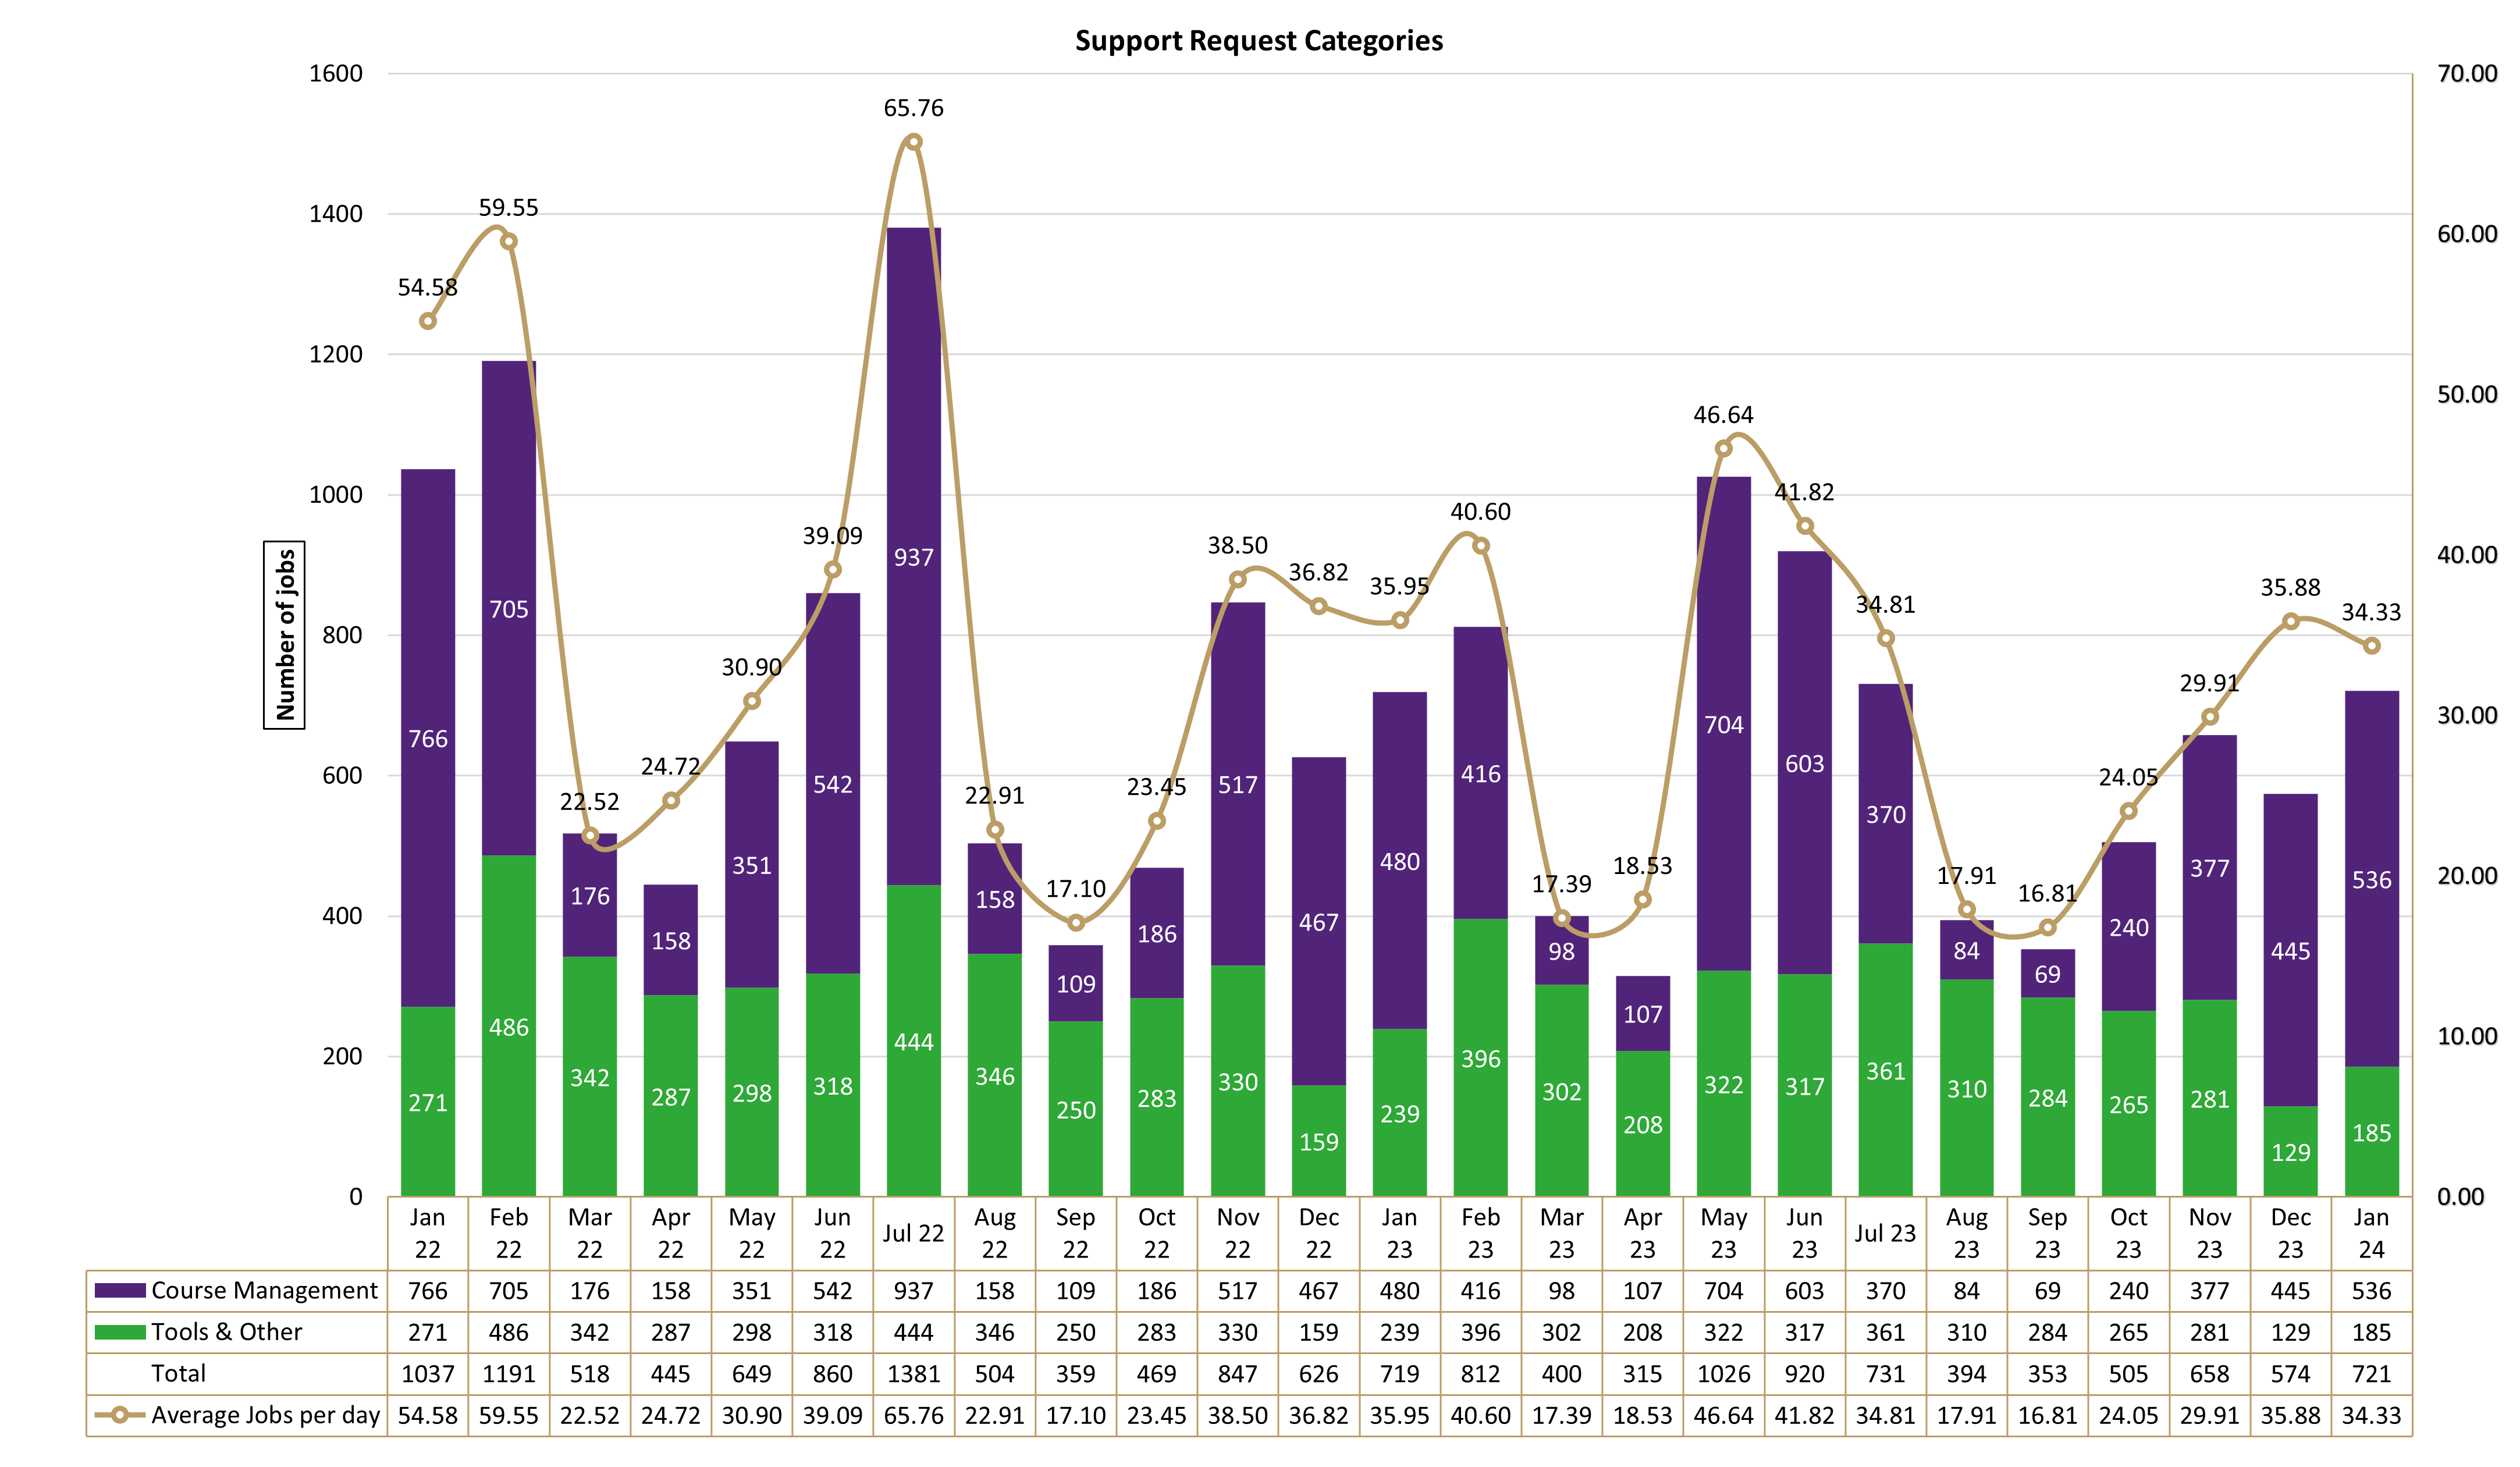 Chart of Support Request Categories from January 2022 to January 2024